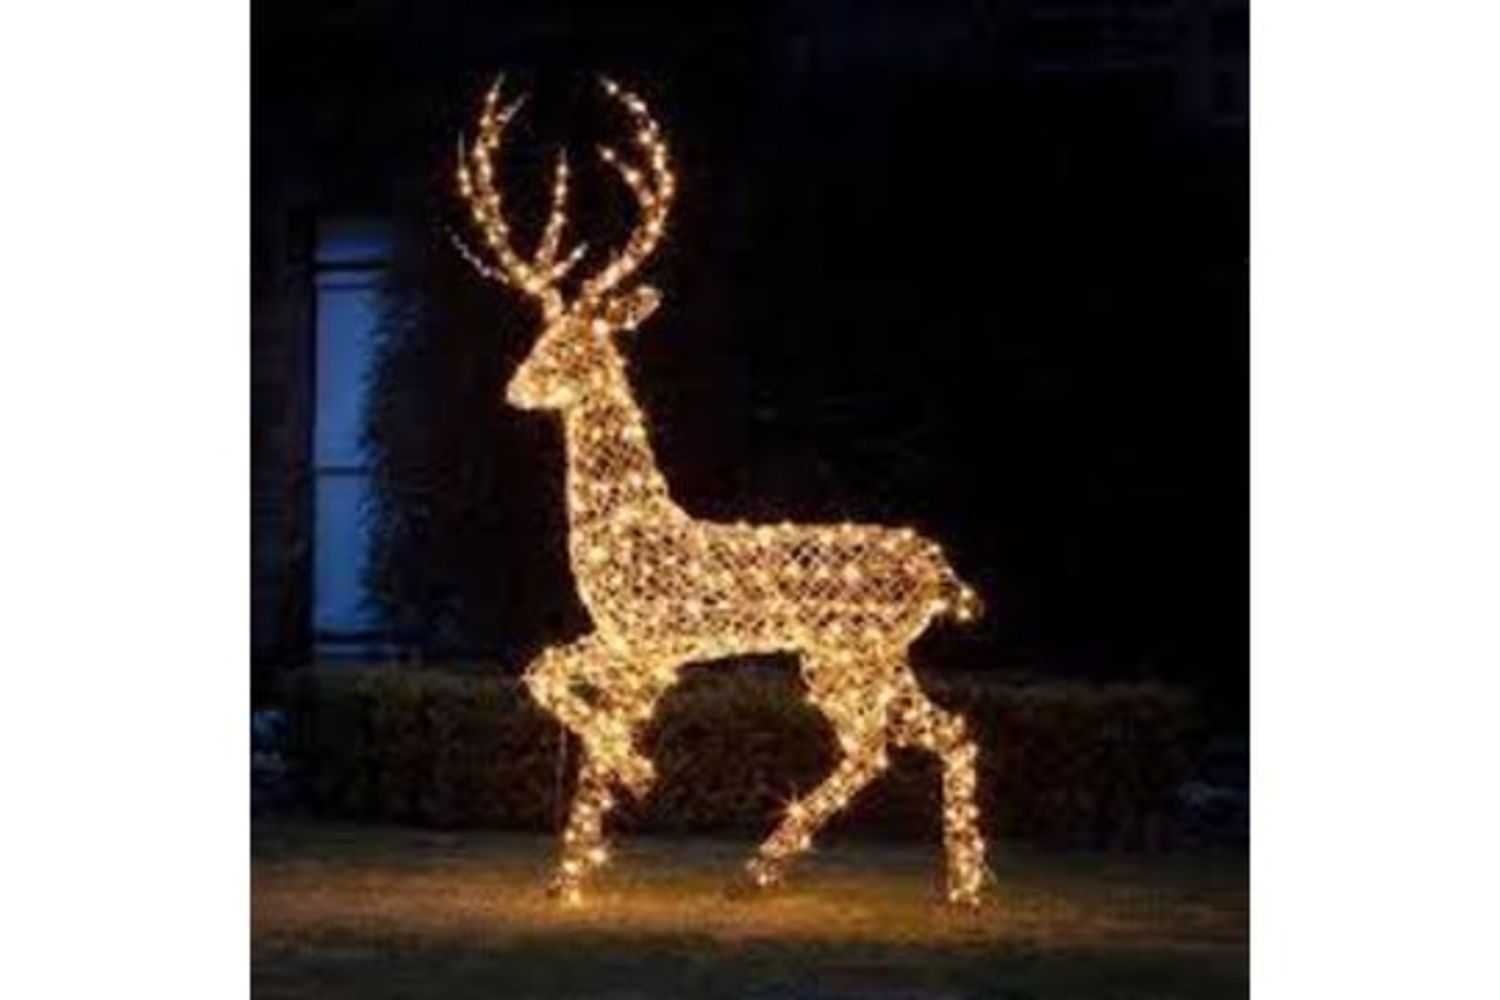 Christmas Goods - Wicker LED Stags, Christmas Crackers, Pop Up Snowmen, LED Grazing Deer, Penguin Family, Trees, Advent Calenders & More!